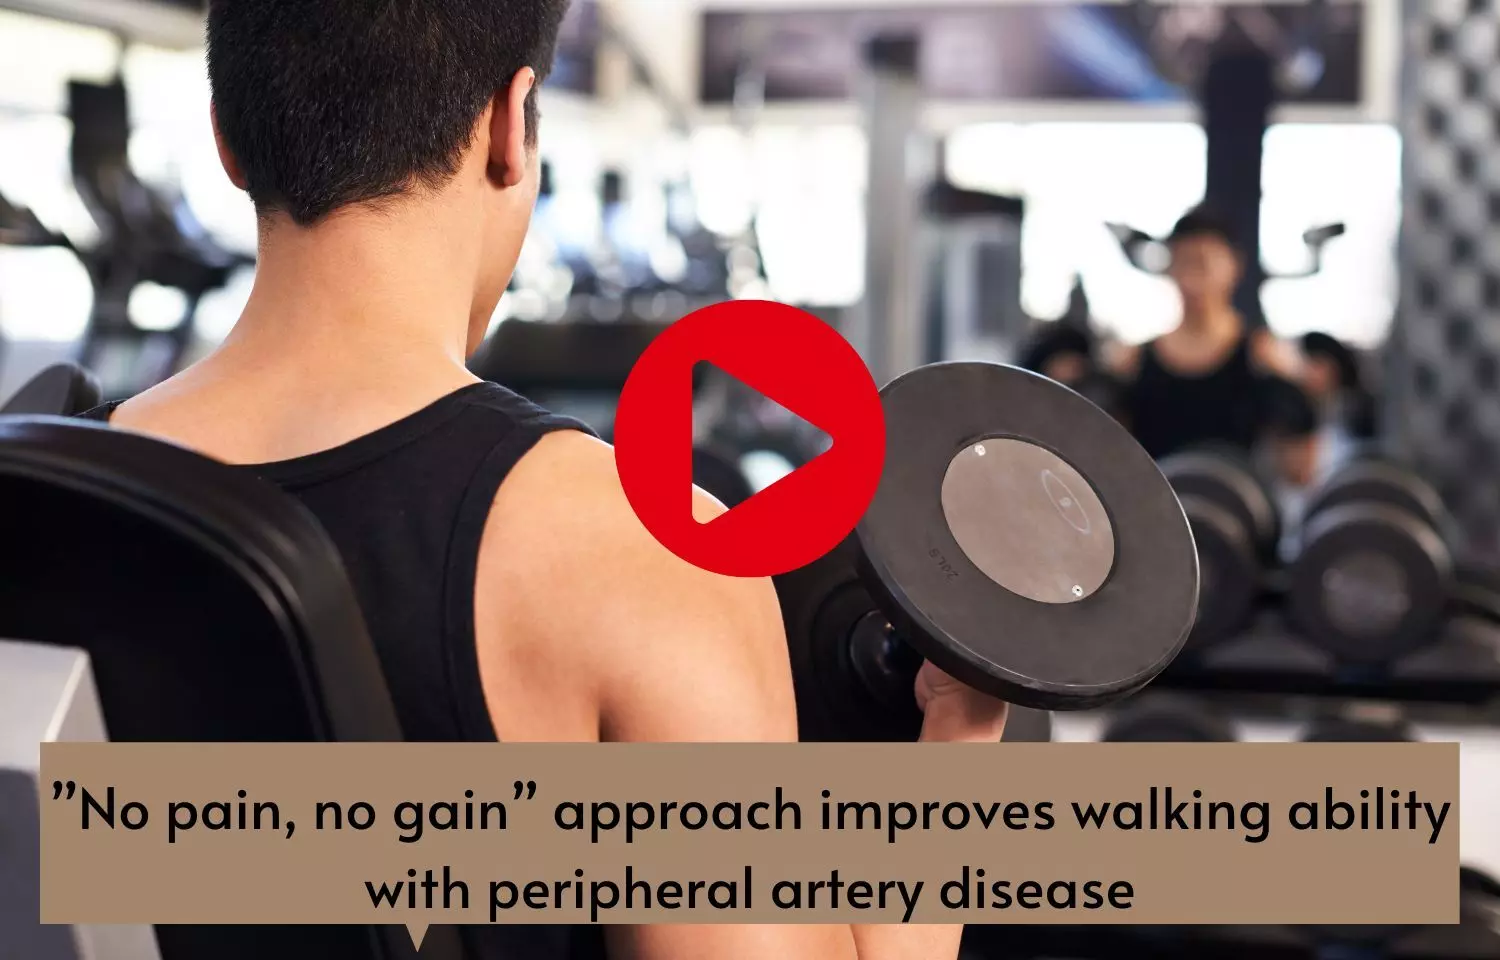 No pain, no gain approach improves walking ability with peripheral artery disease